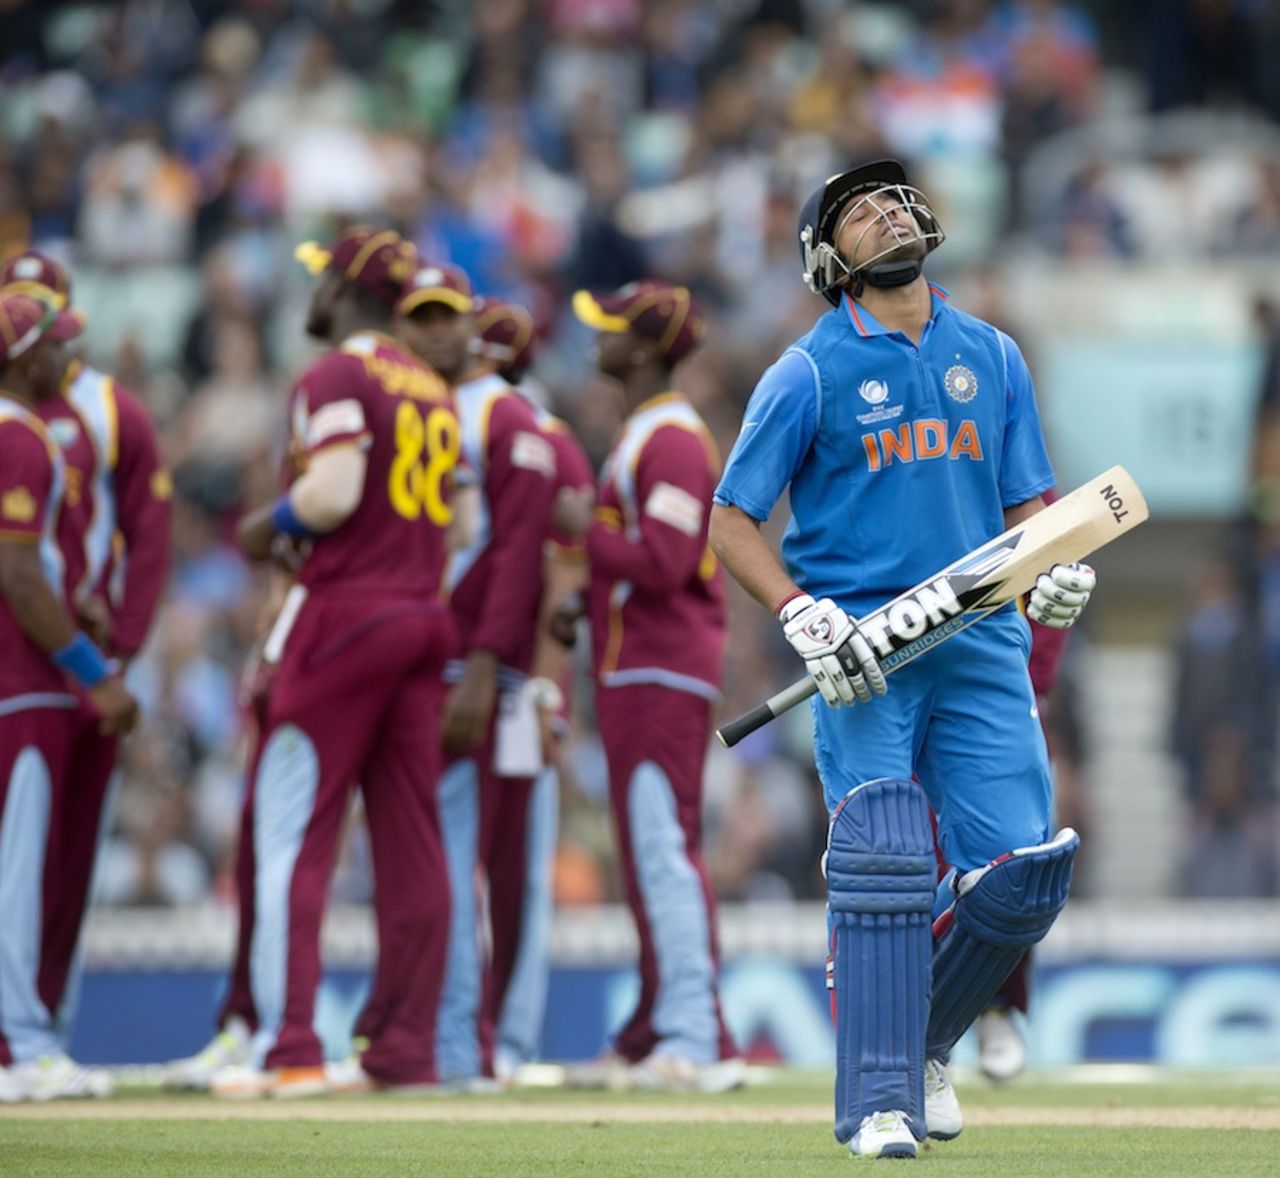 Rohit Sharma reacts after being given out, India v West Indies, Champions Trophy, Group B, The Oval, June 11, 2013